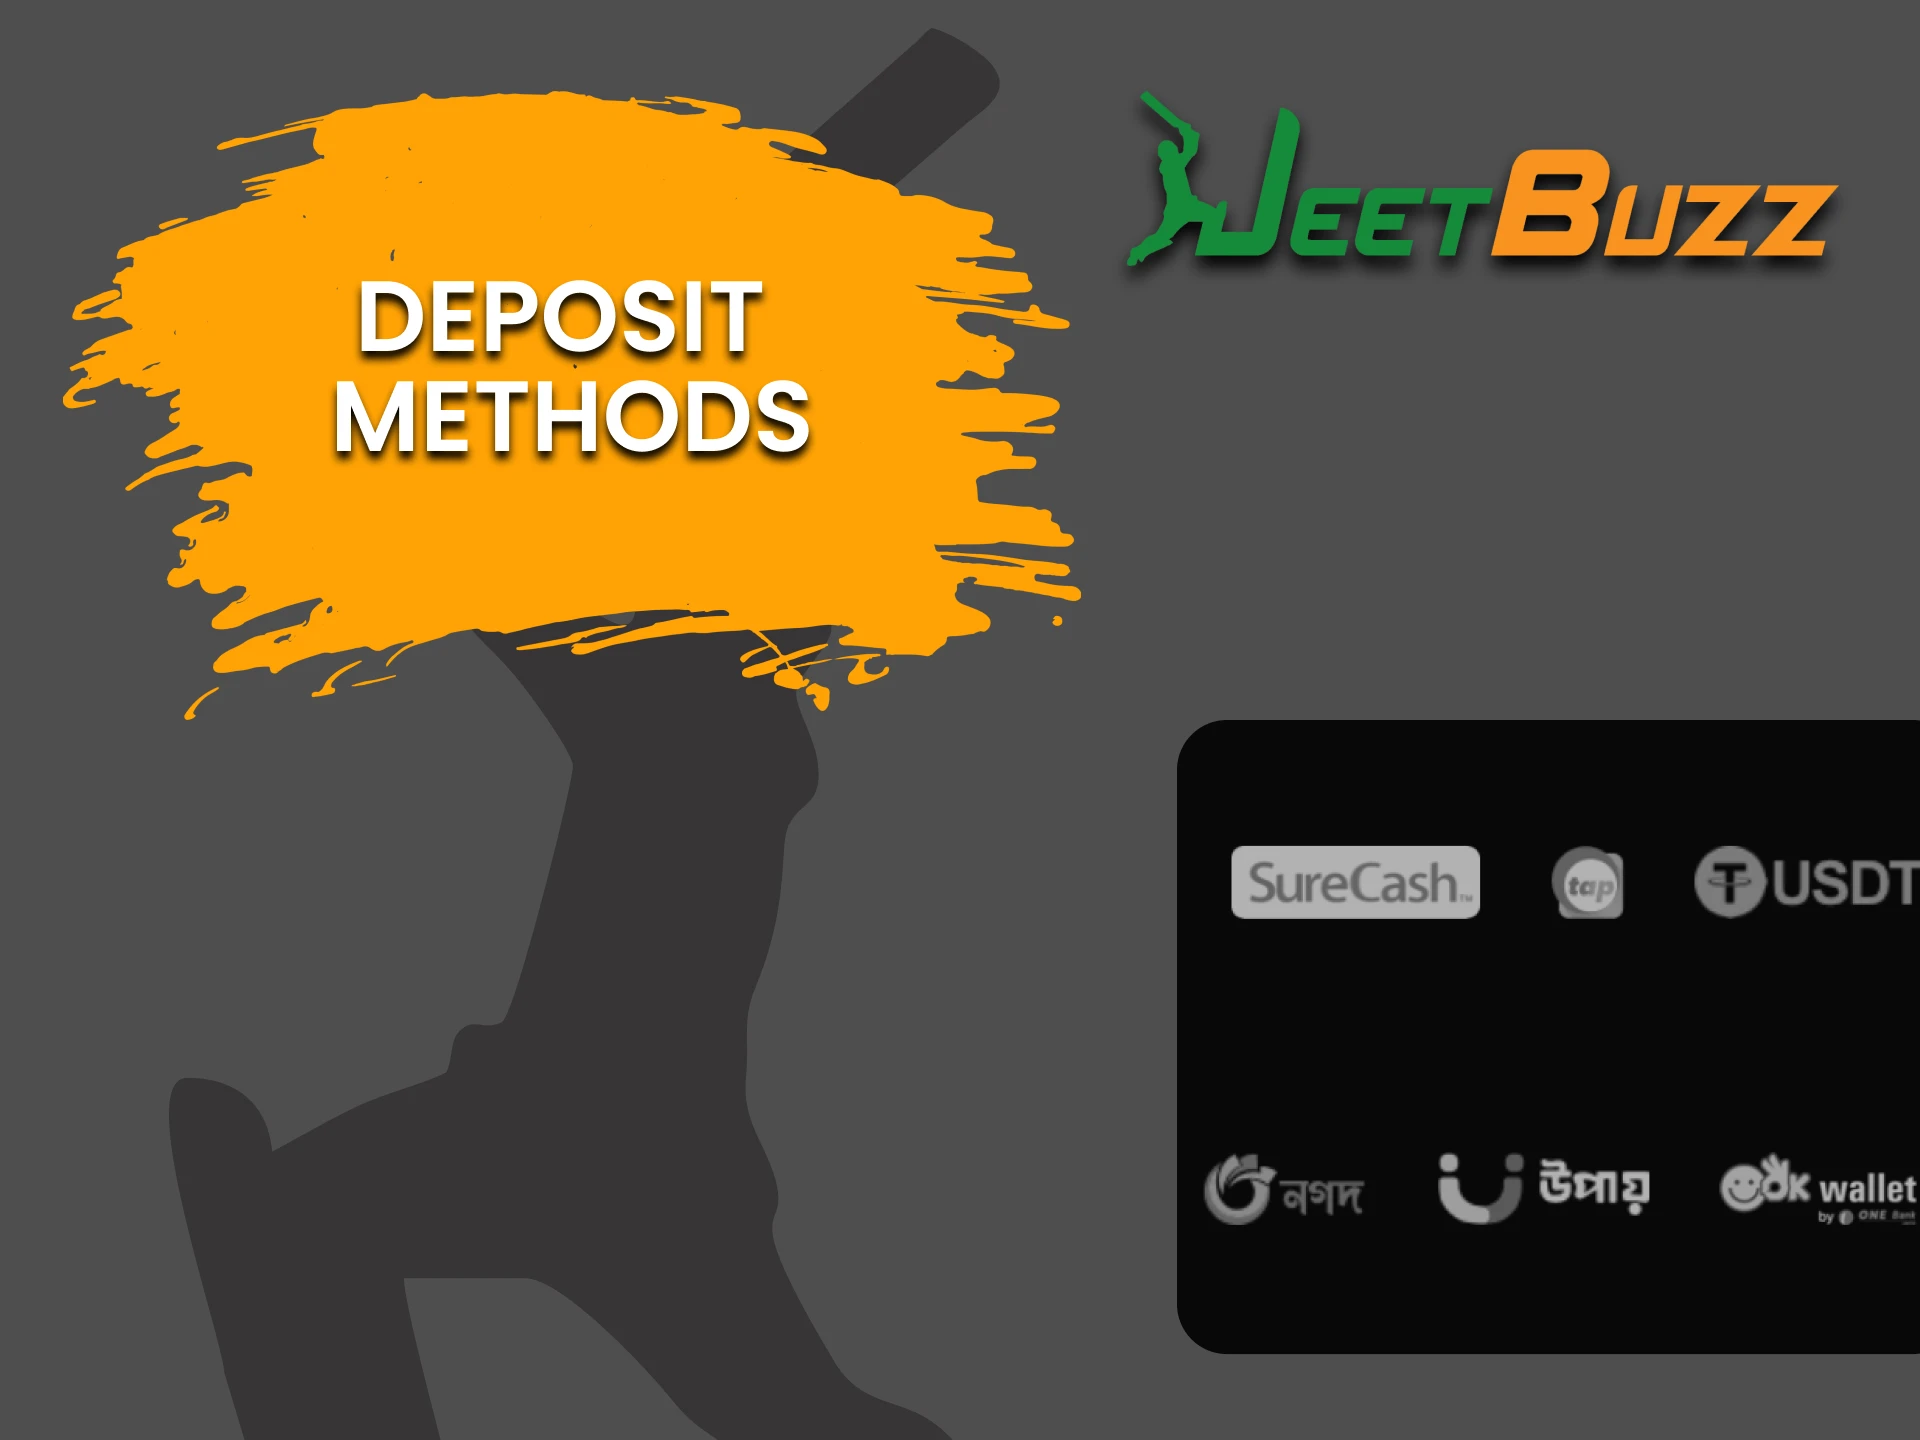 Find out what deposit methods are available on JeetBuzz.